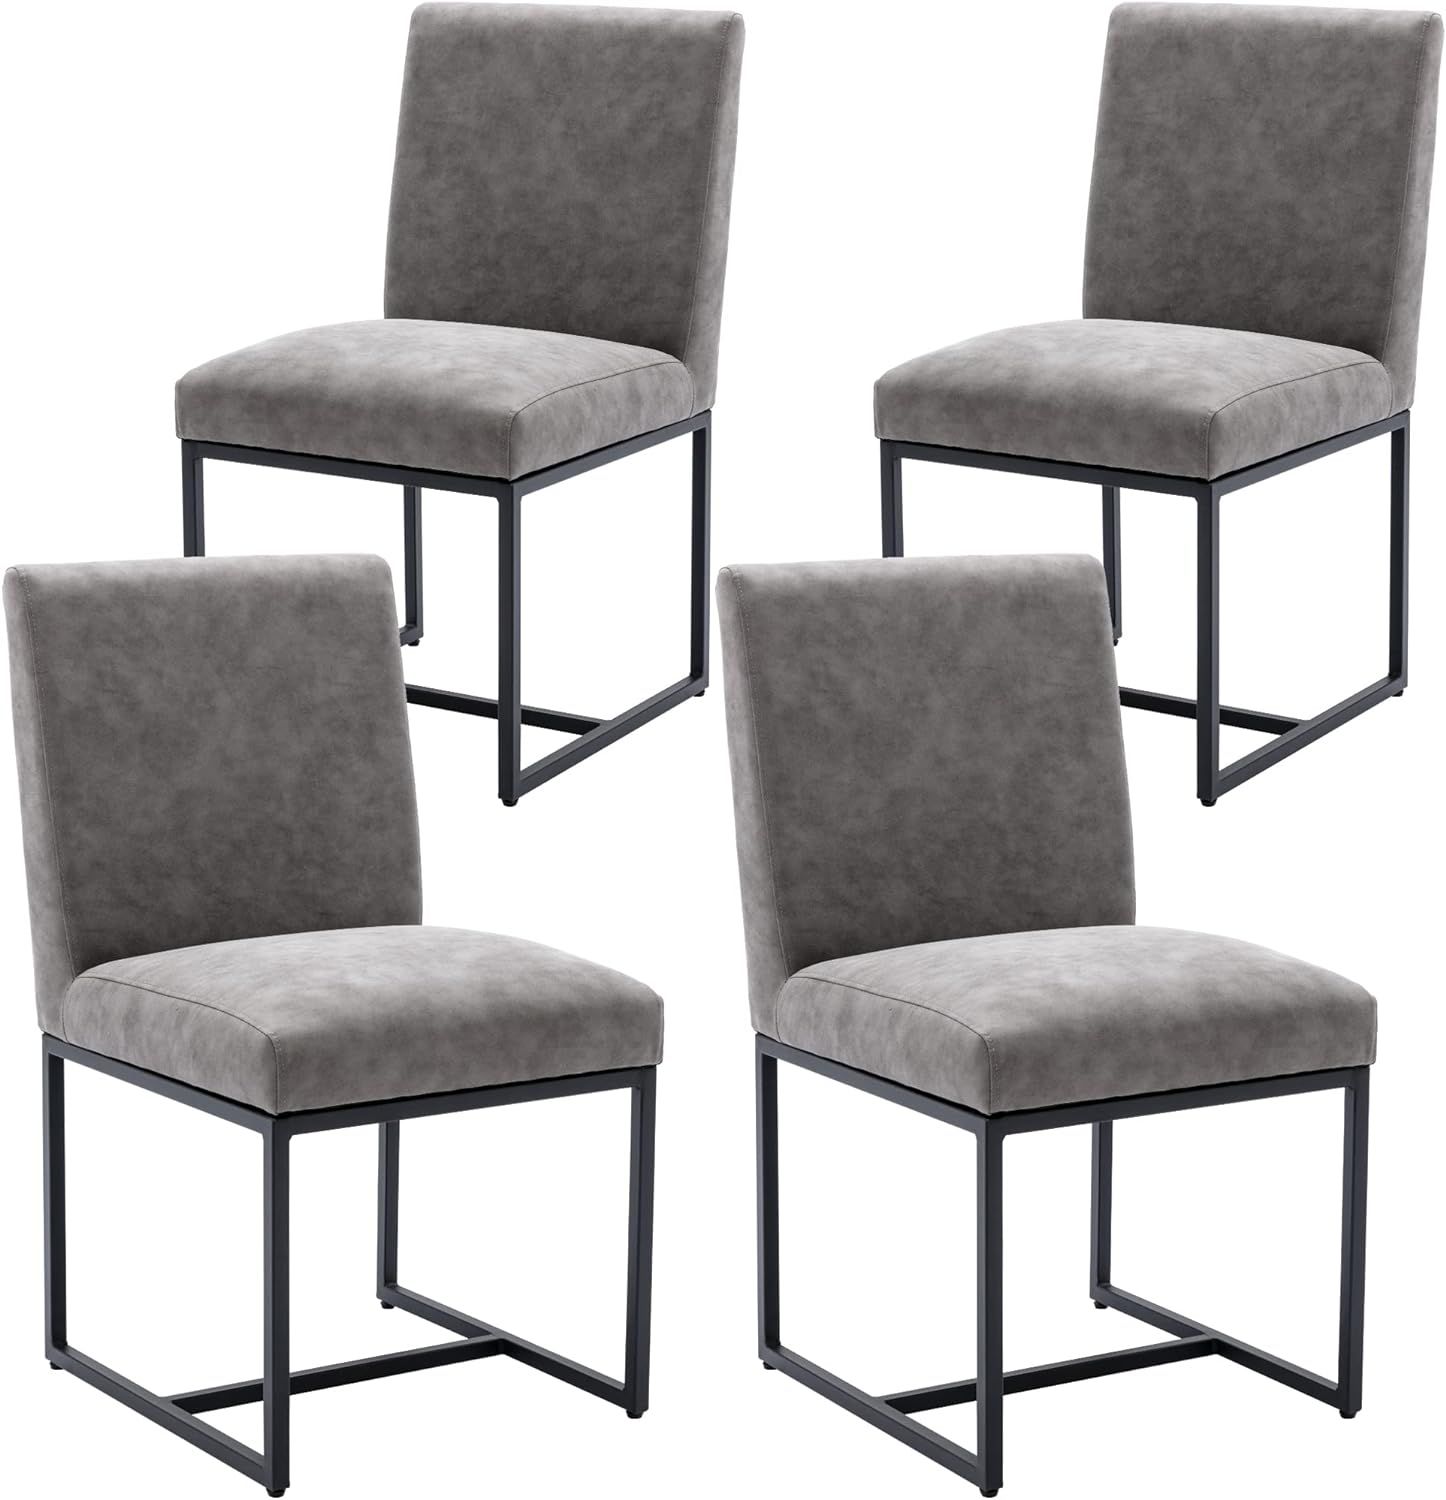 Wahson Set of 4 Upholstered Dining Chair, Faux Leather Mid Century Modern Kitchen Leather Chair A... | Amazon (US)